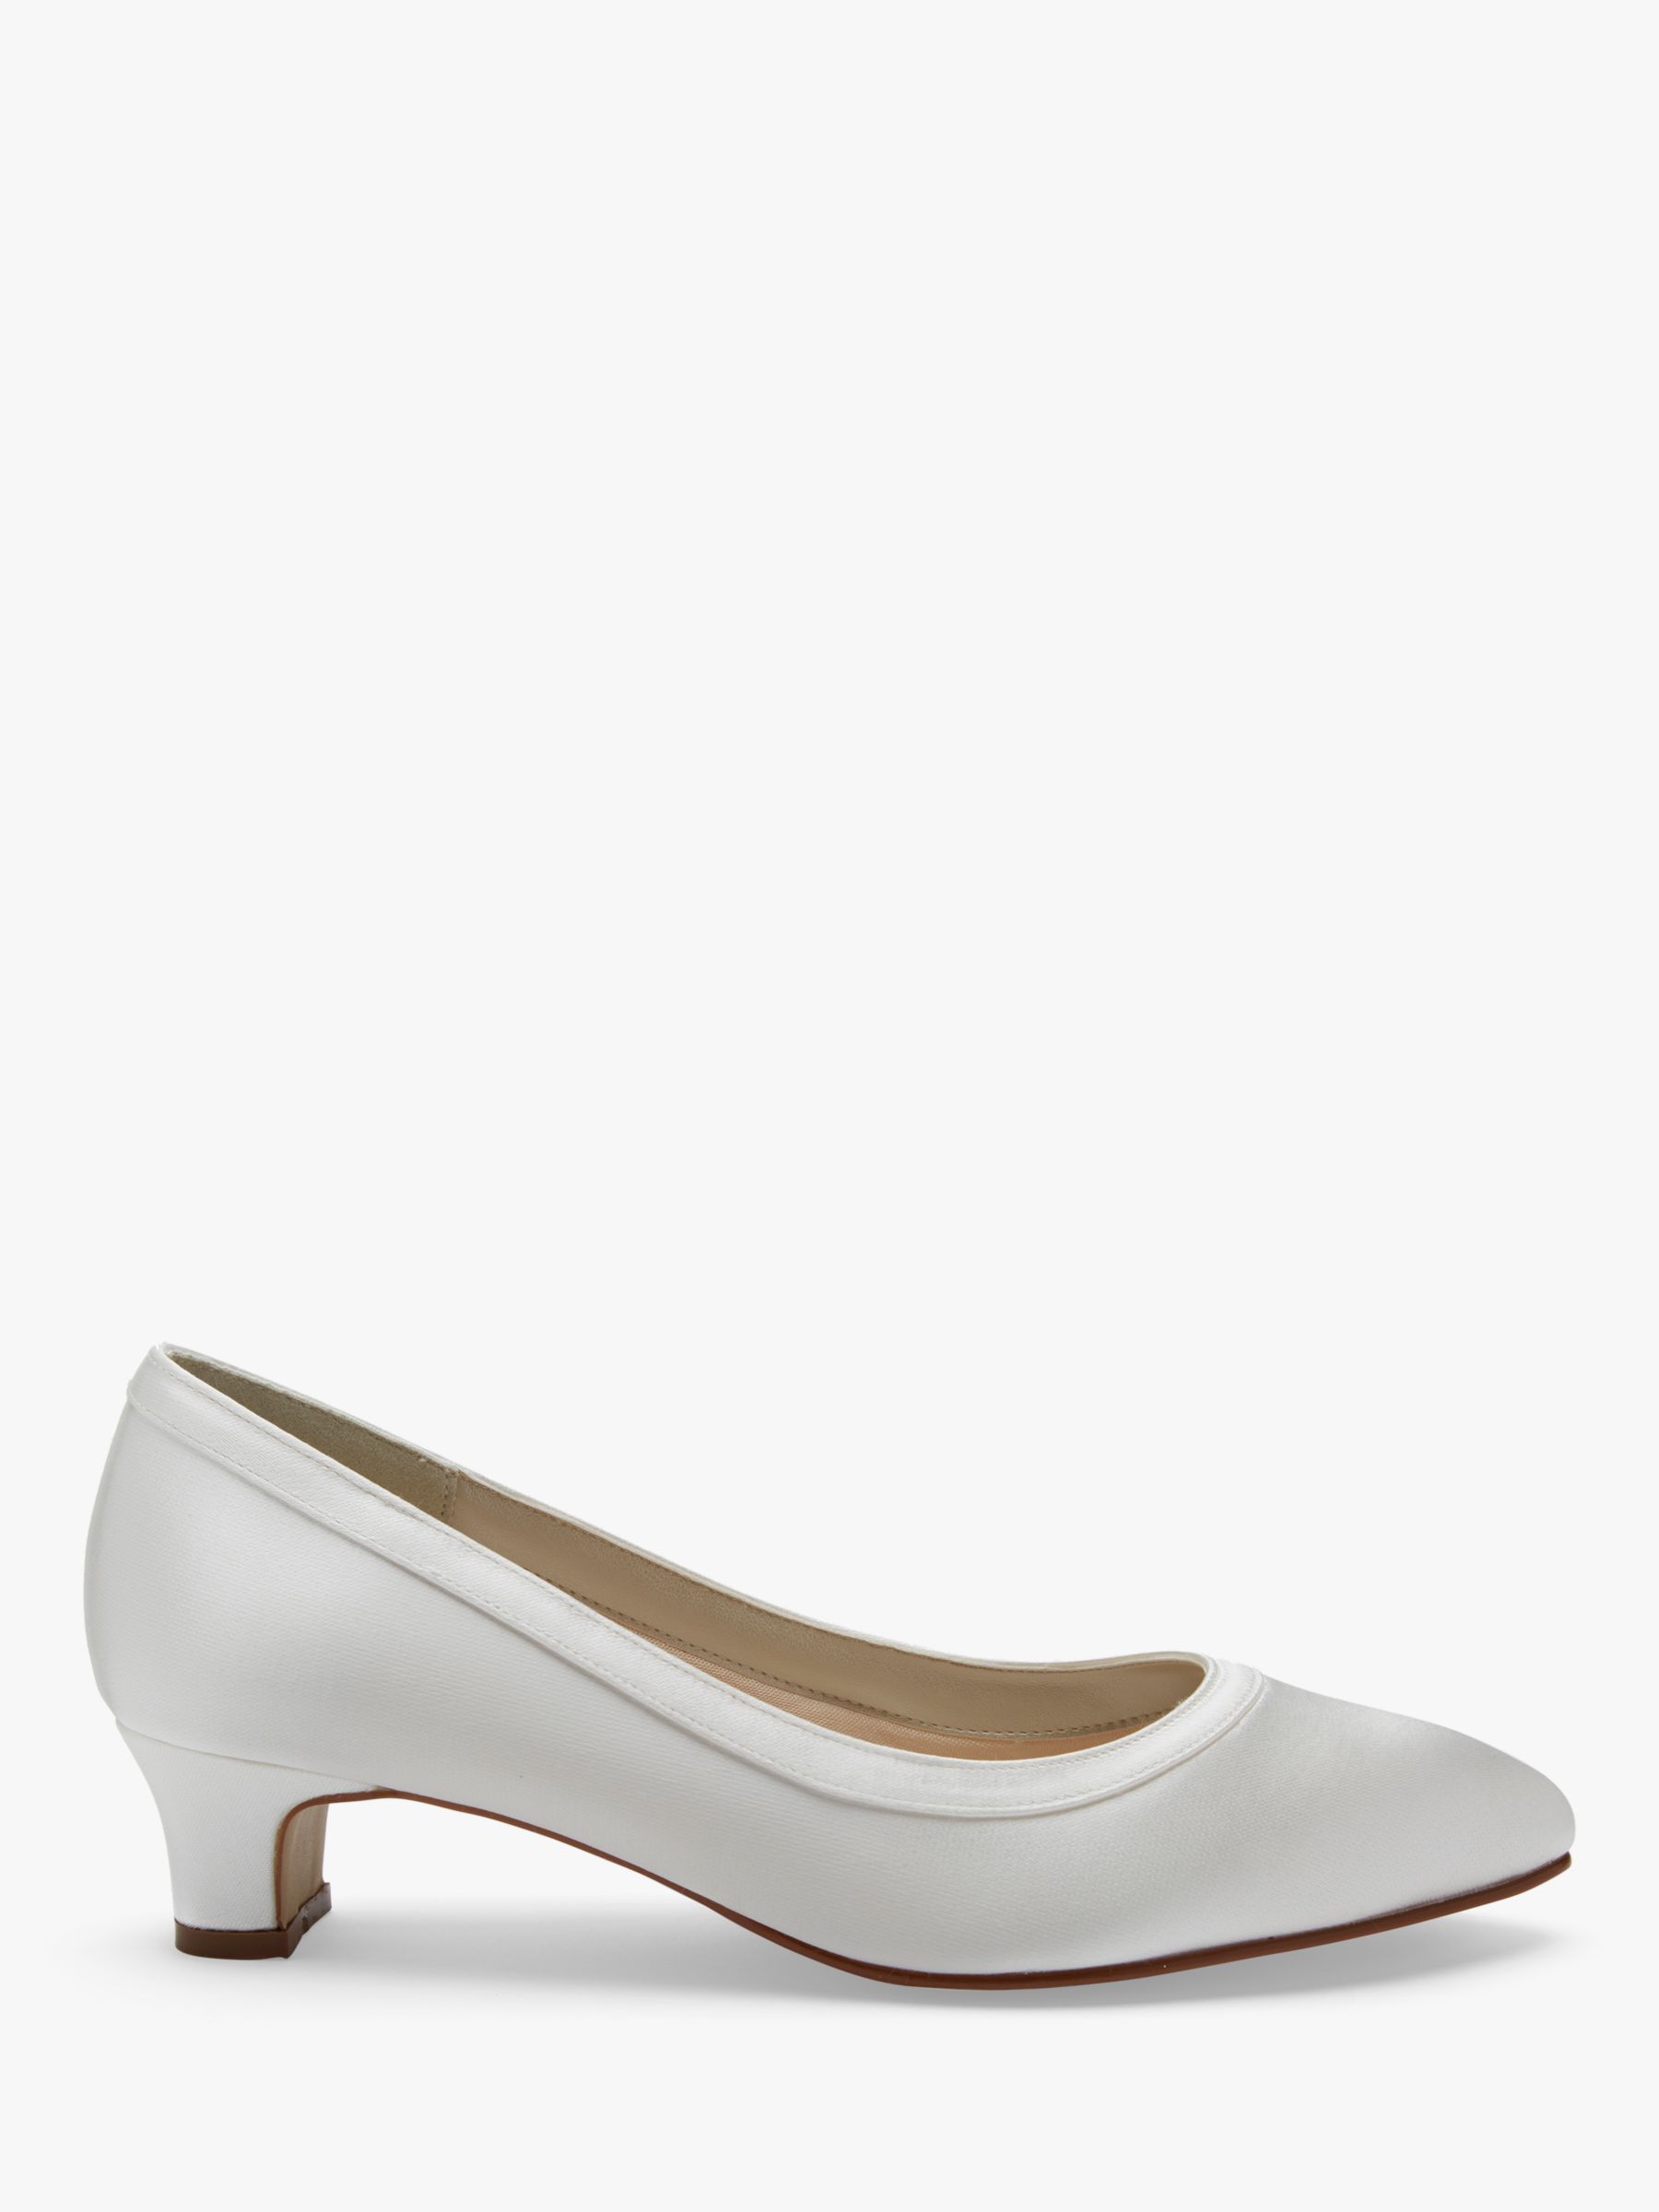 Rainbow Club Gisele Wide Fit Court Shoes, Ivory at John Lewis